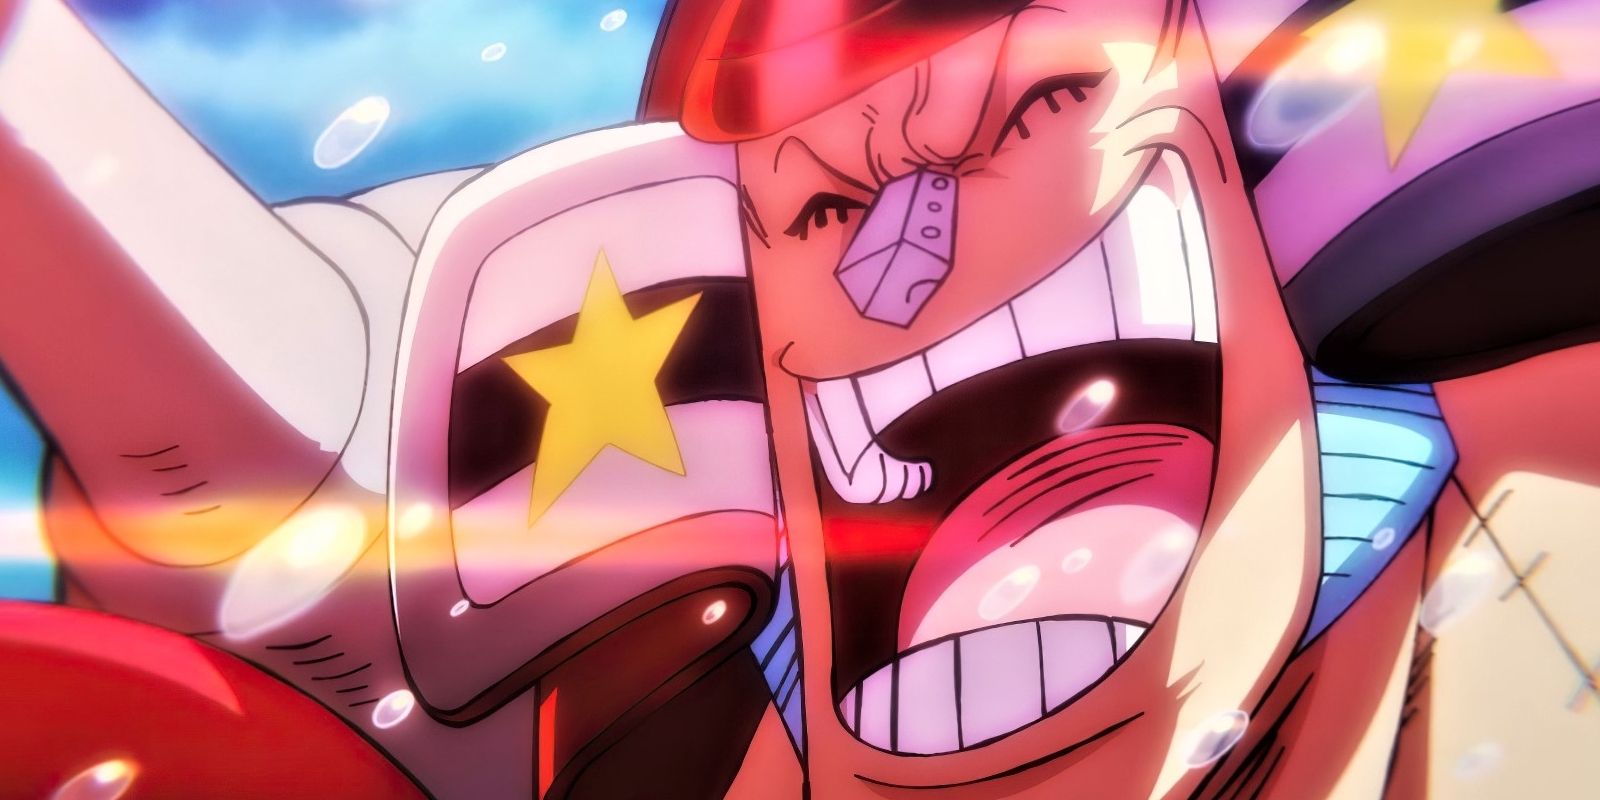 Franky smiling in One Piece